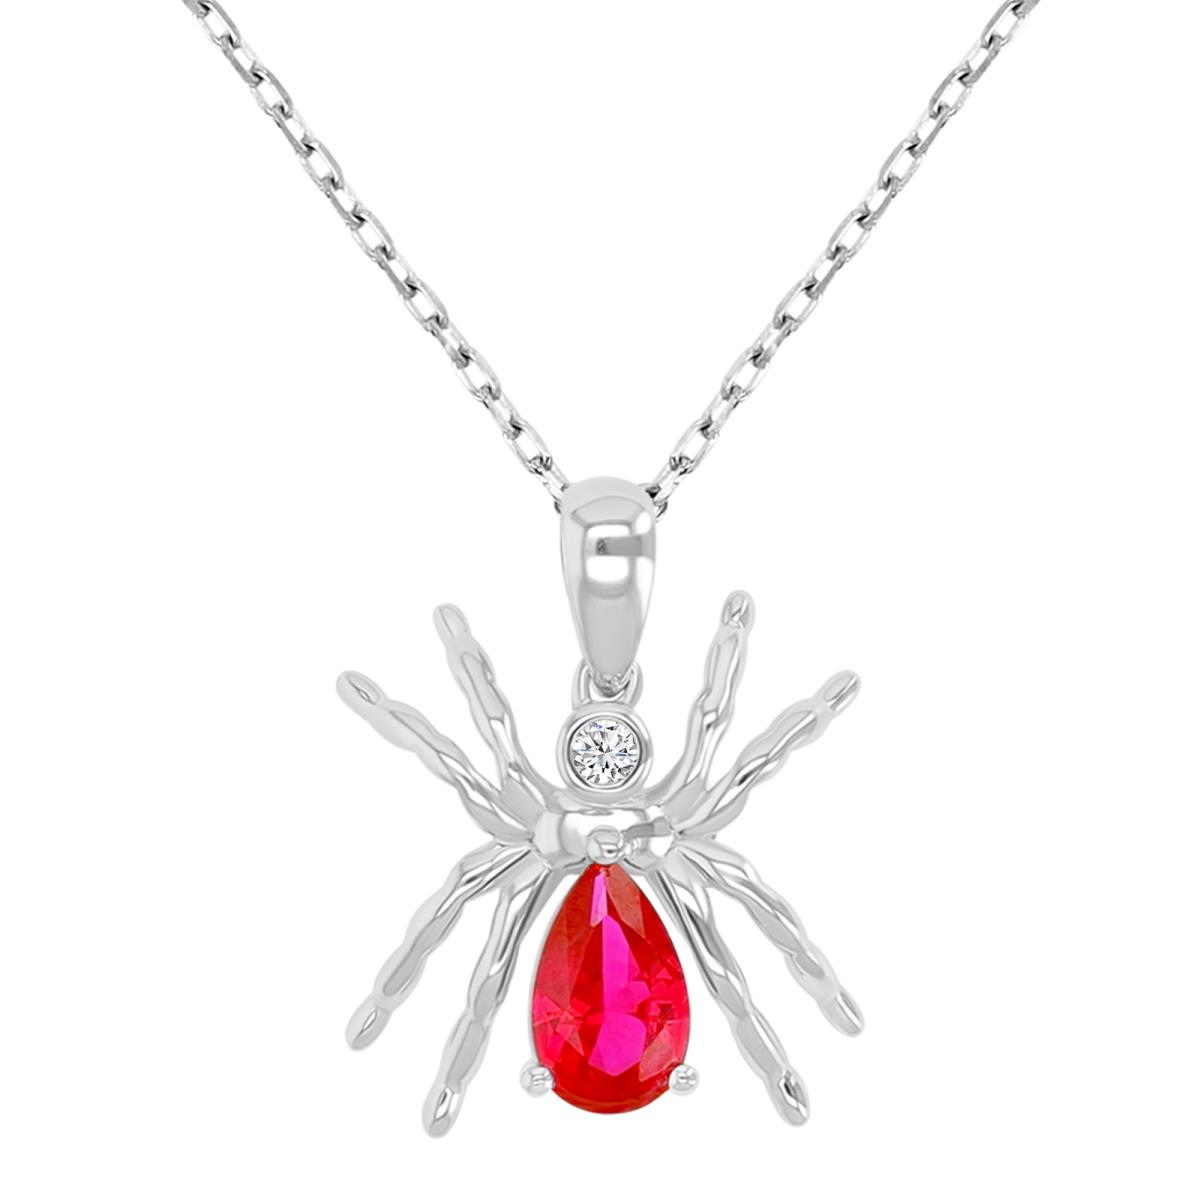 Sterling Silver Rhodium 8x5mm Pear Cut Created Ruby & 2mm Rd Created White Sapphire Spider Pendant